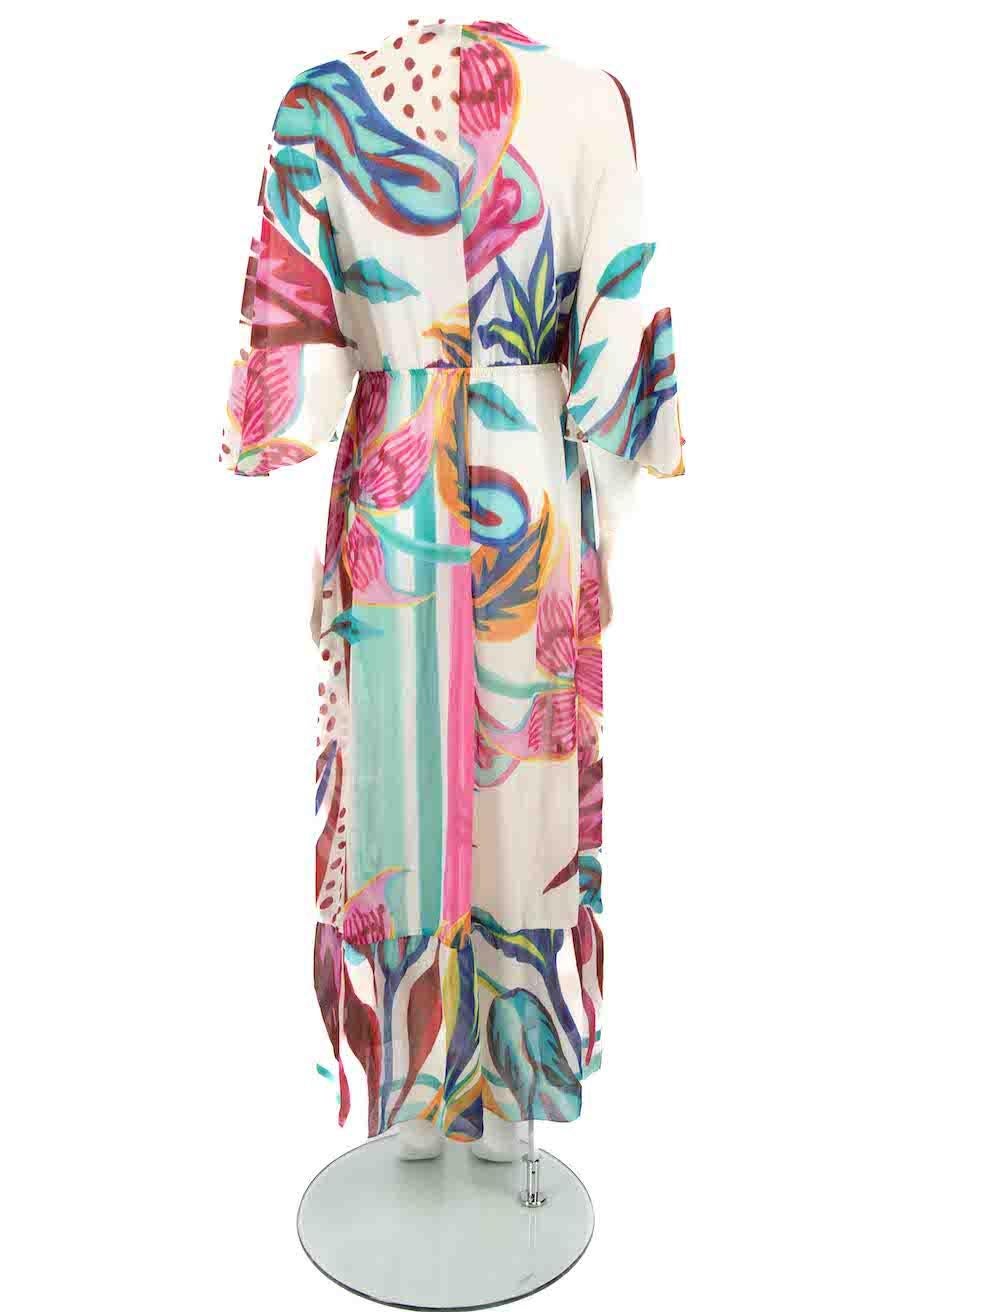 PatBO Abstract Print Sheer Maxi Cover Up Dress Size S In Good Condition For Sale In London, GB